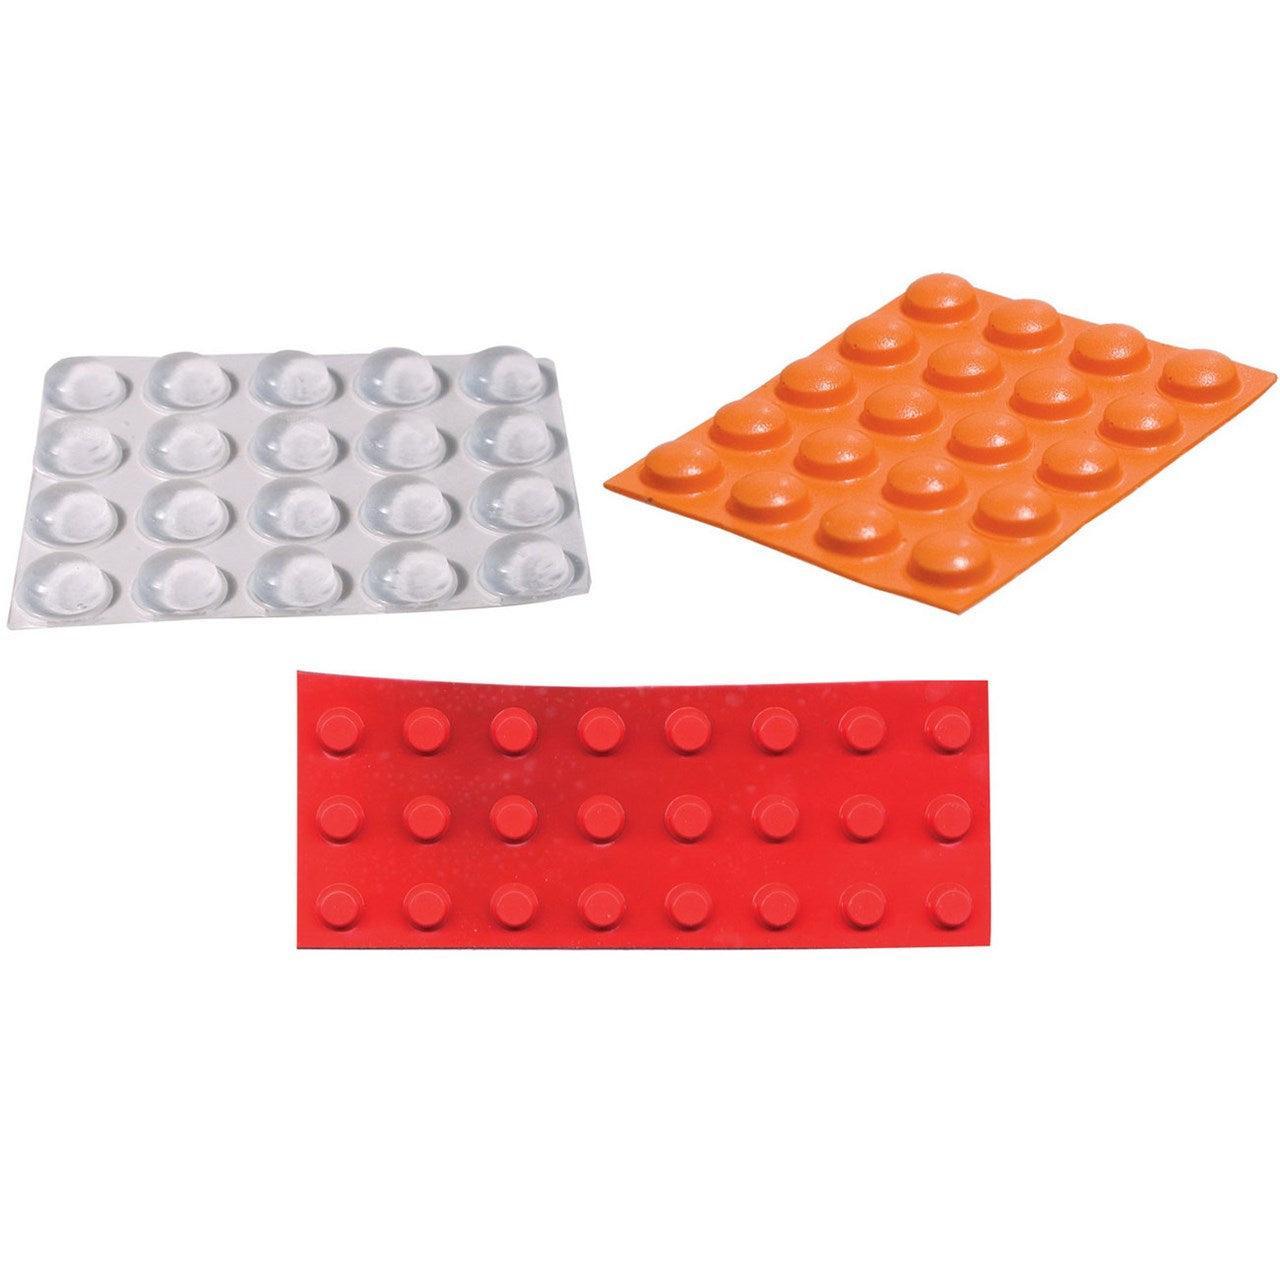 Bump Dots Combo Pack- 64 pieces - The Low Vision Store